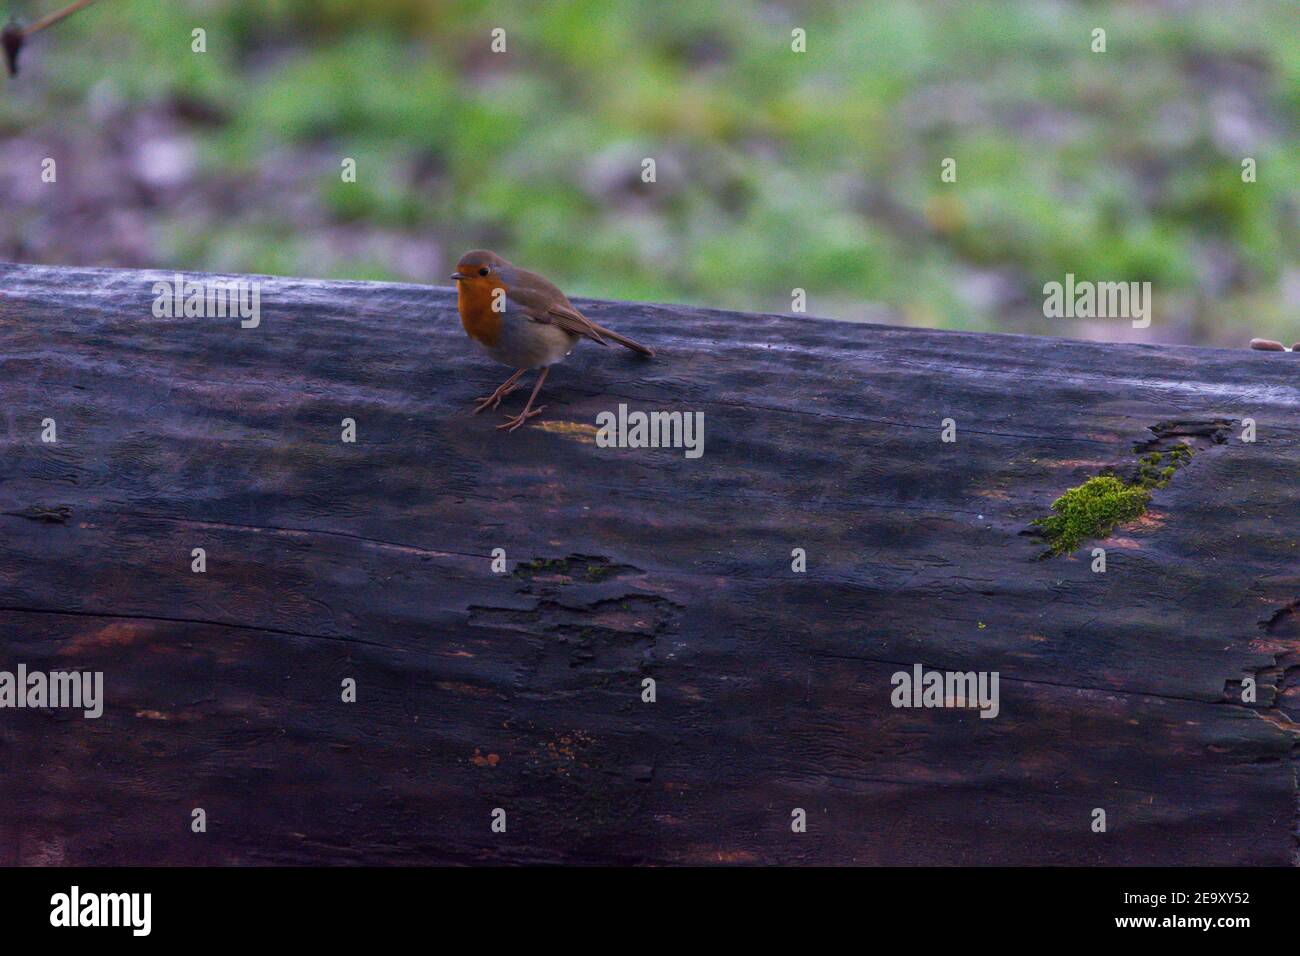 A robin on a large log Stock Photo